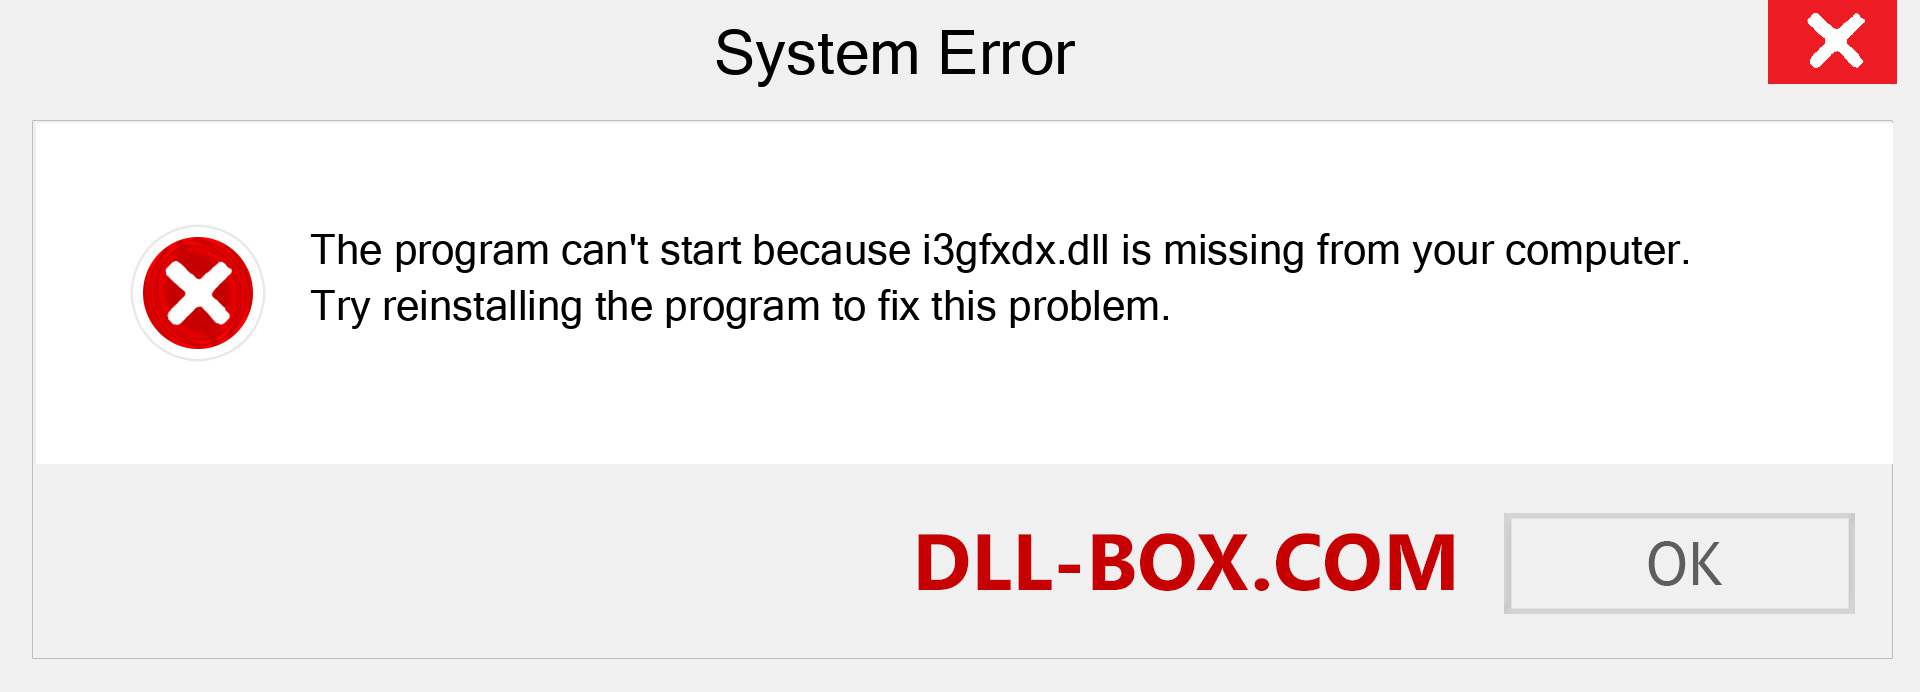  i3gfxdx.dll file is missing?. Download for Windows 7, 8, 10 - Fix  i3gfxdx dll Missing Error on Windows, photos, images